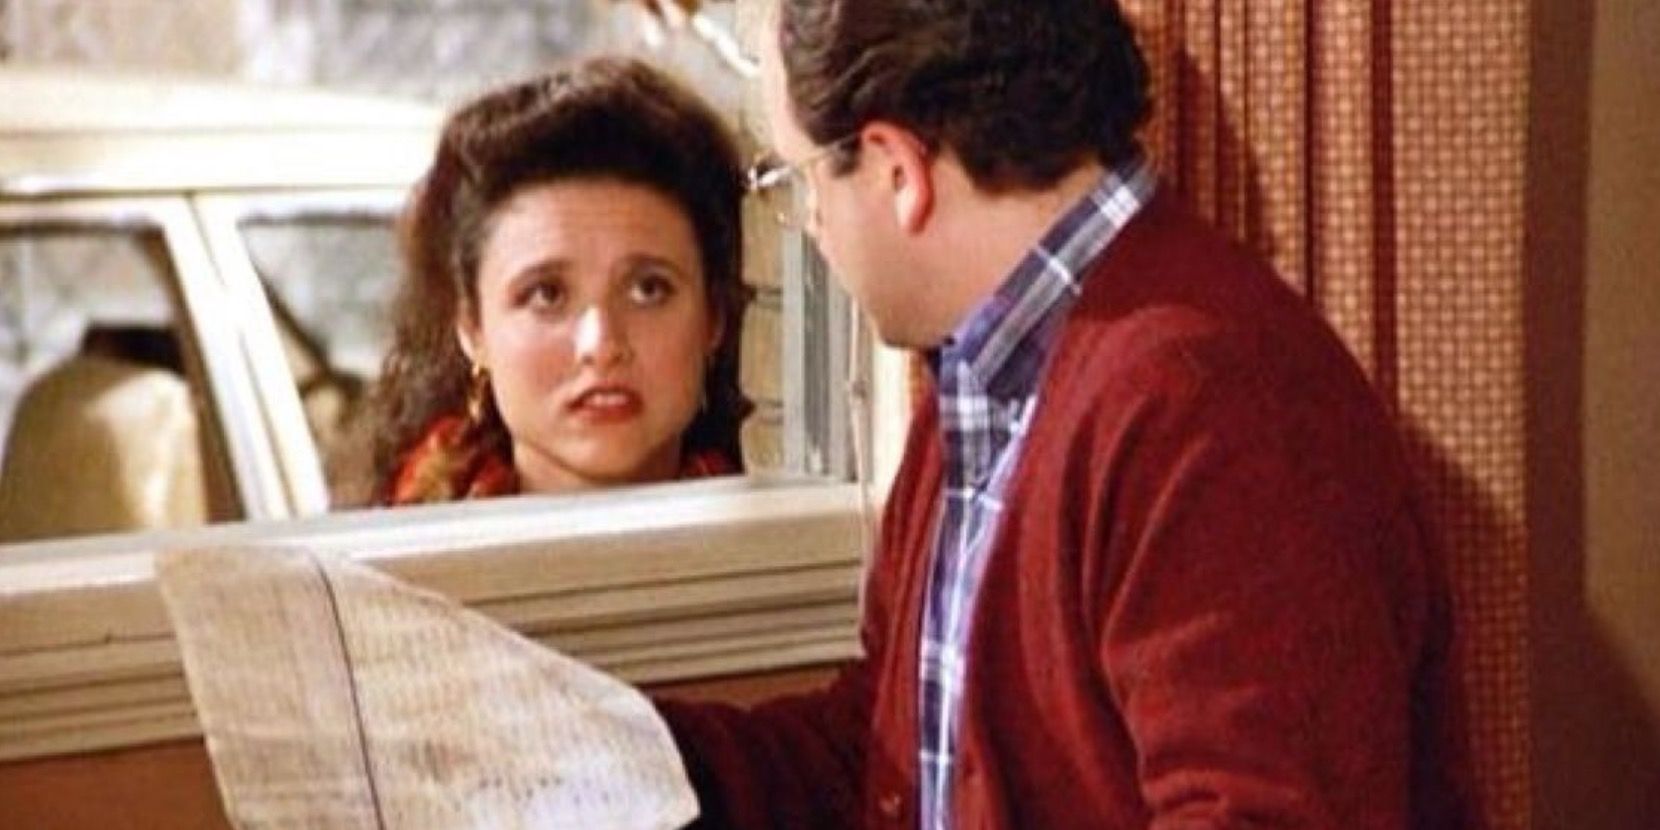 George passes an IQ test to Elaine in Seinfeld